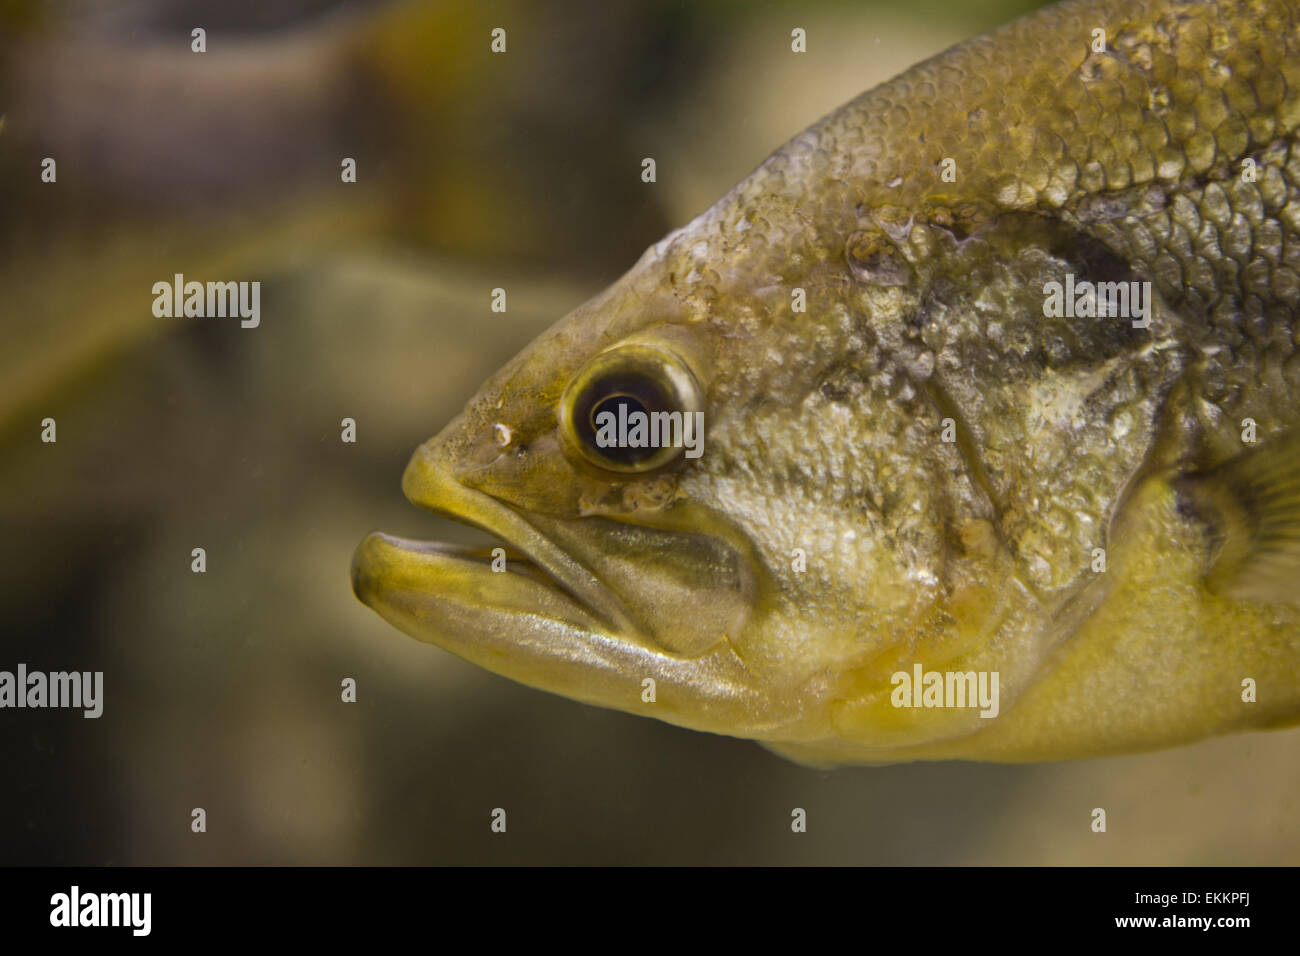 A Largemouth Bass, Micropterus salmoides, floats motionless, close-up Stock Photo